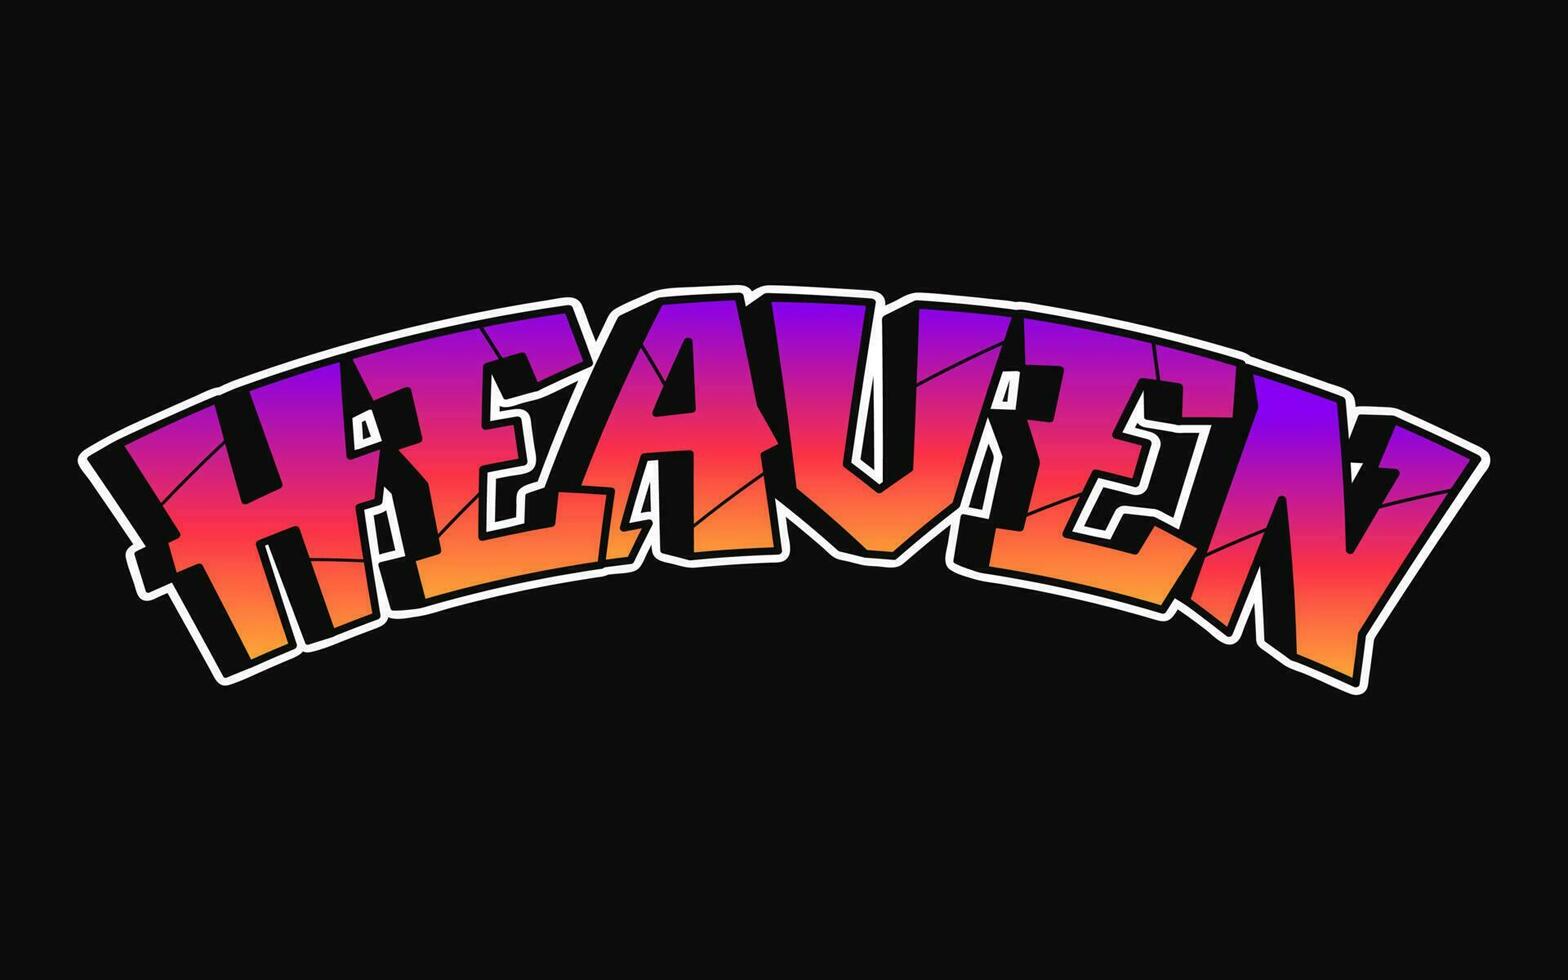 Heaven - single word, letters graffiti style. Vector hand drawn logo. Funny cool trippy word Heaven, fashion, graffiti style print t-shirt, poster concept